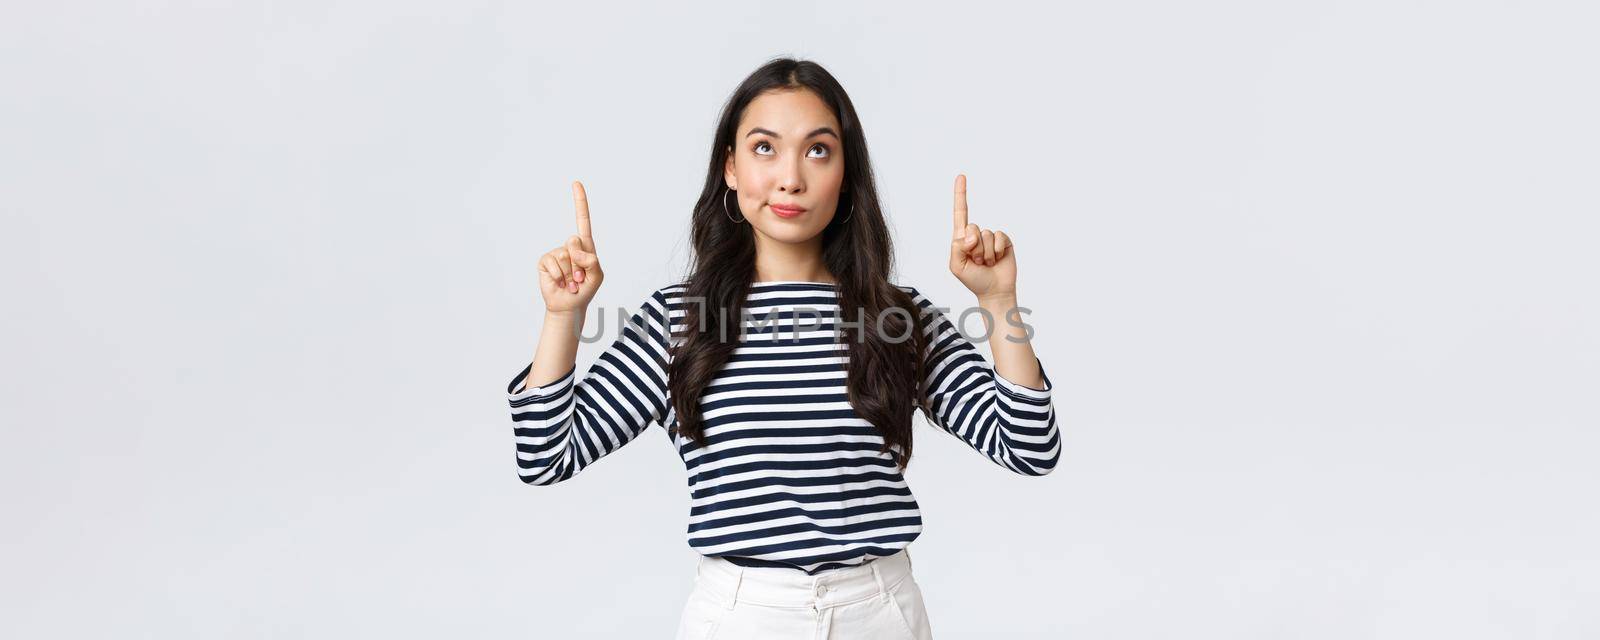 Lifestyle, beauty and fashion, people emotions concept. Indecisive and doubtful cute asian woman looking, pointing fingers up at strange promo, having doubts, hesitating before buying.